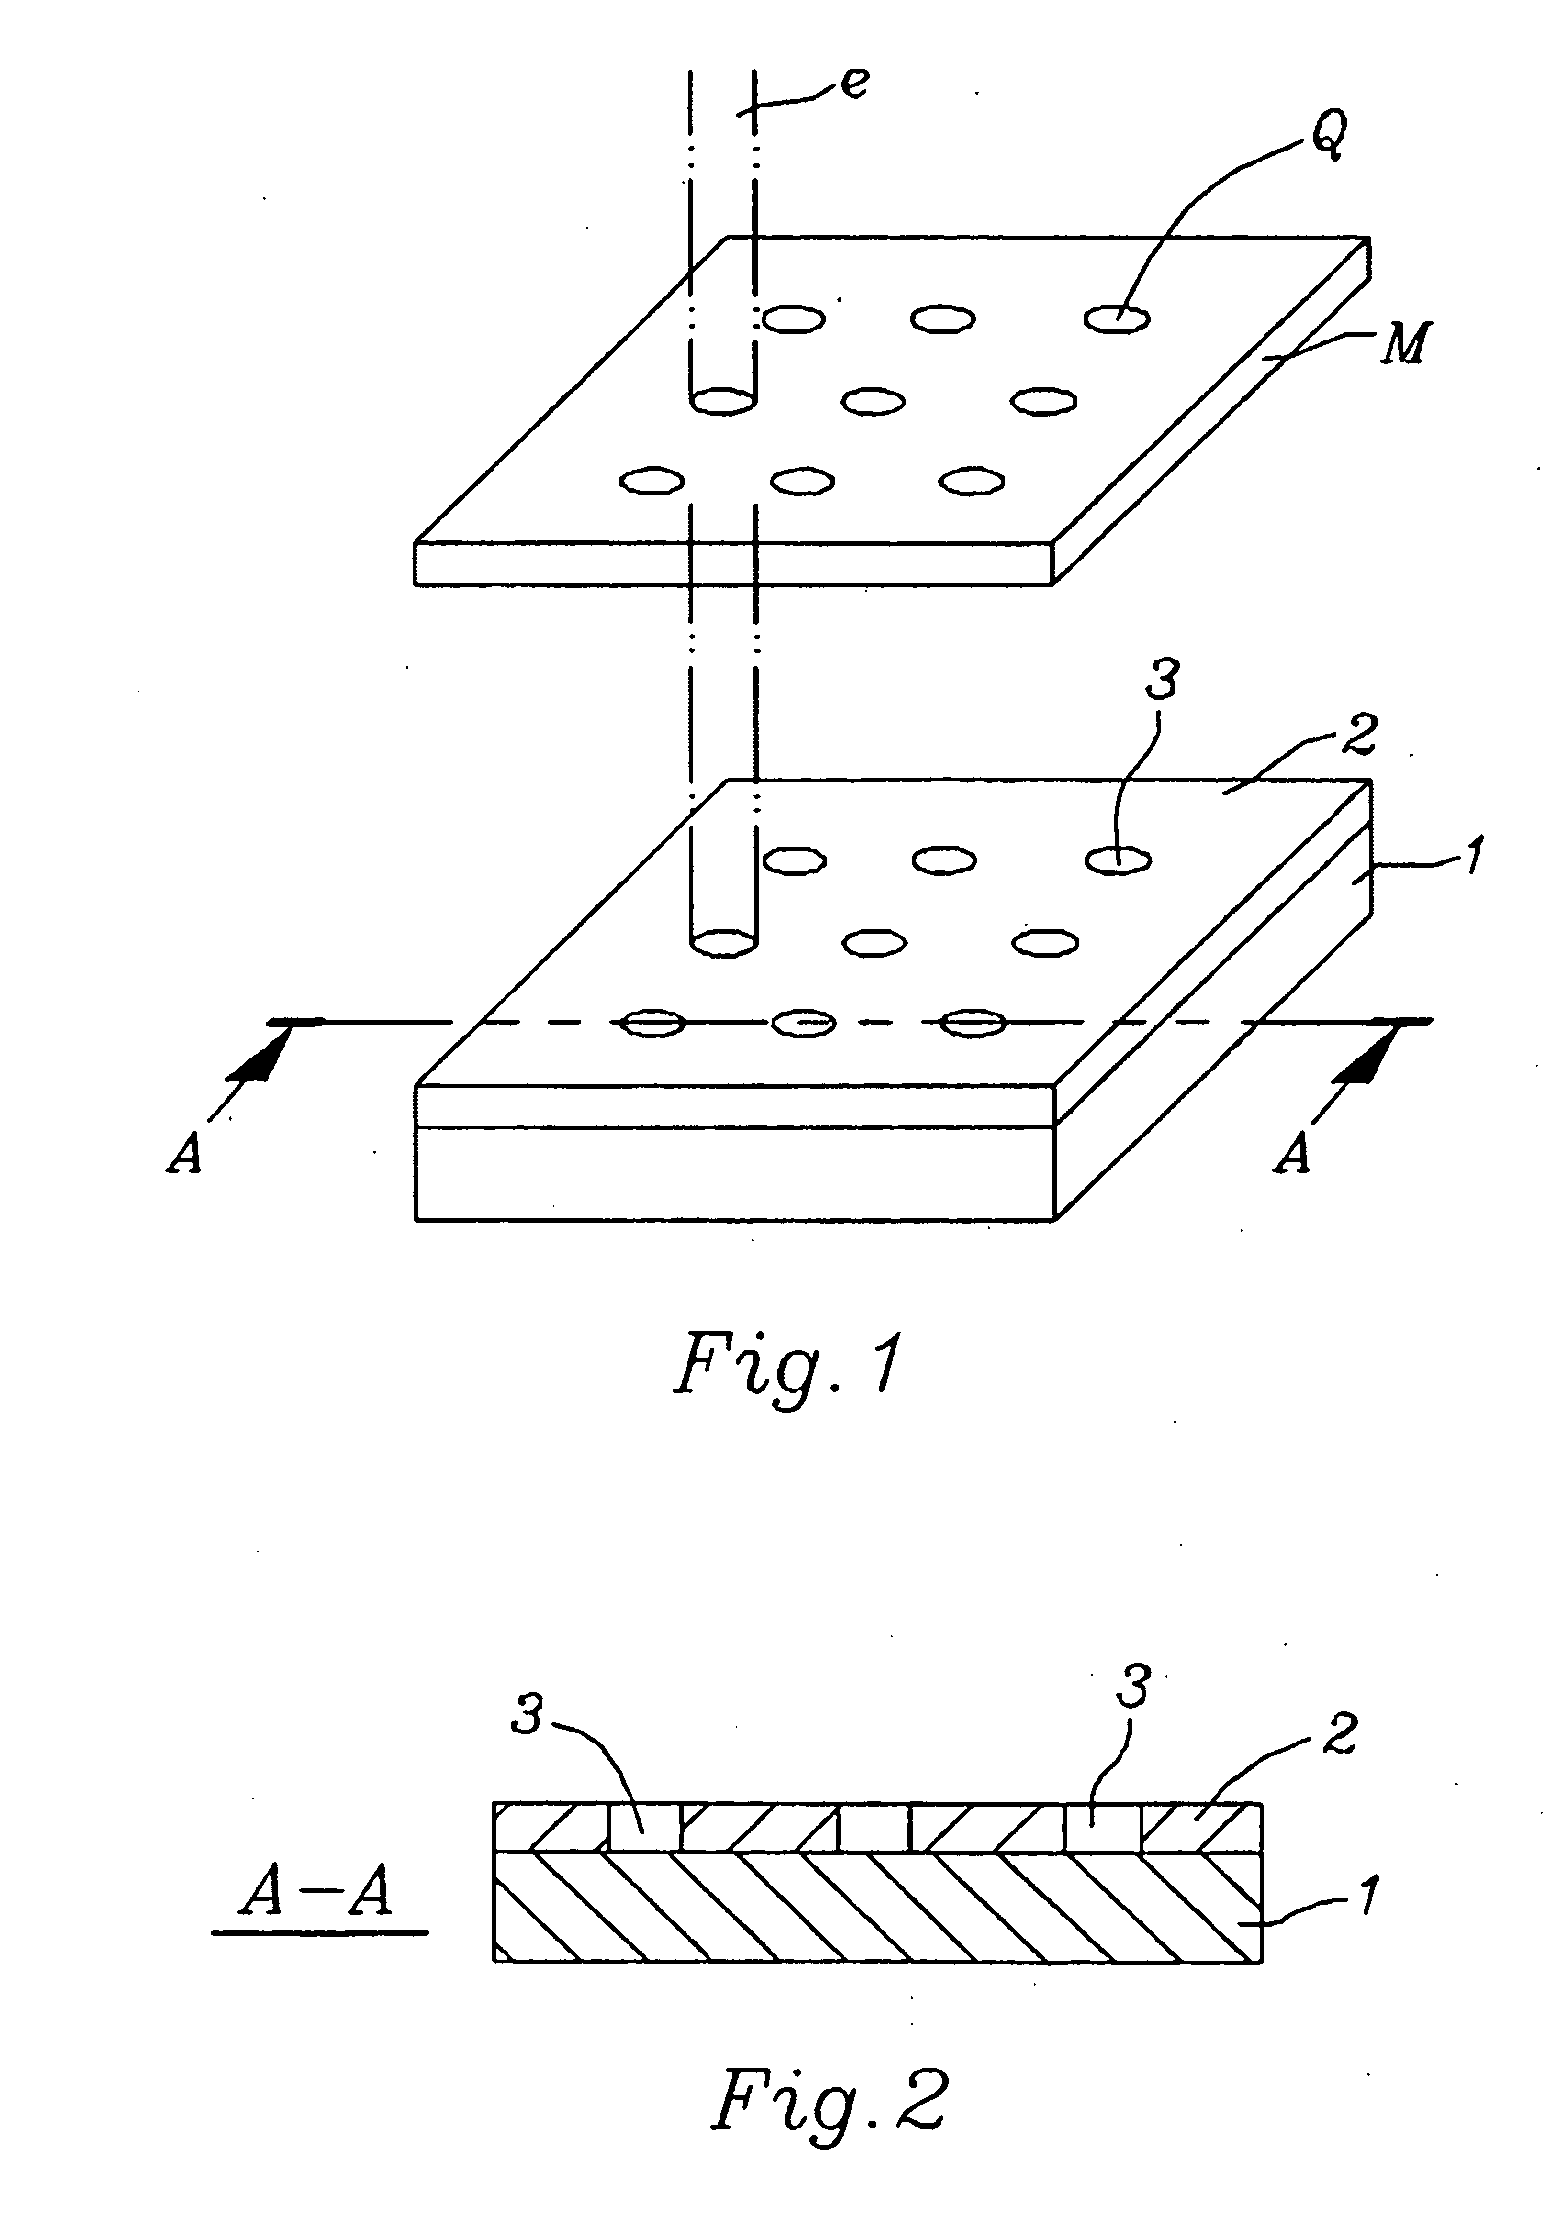 Method of microminiaturizing a nano-structure